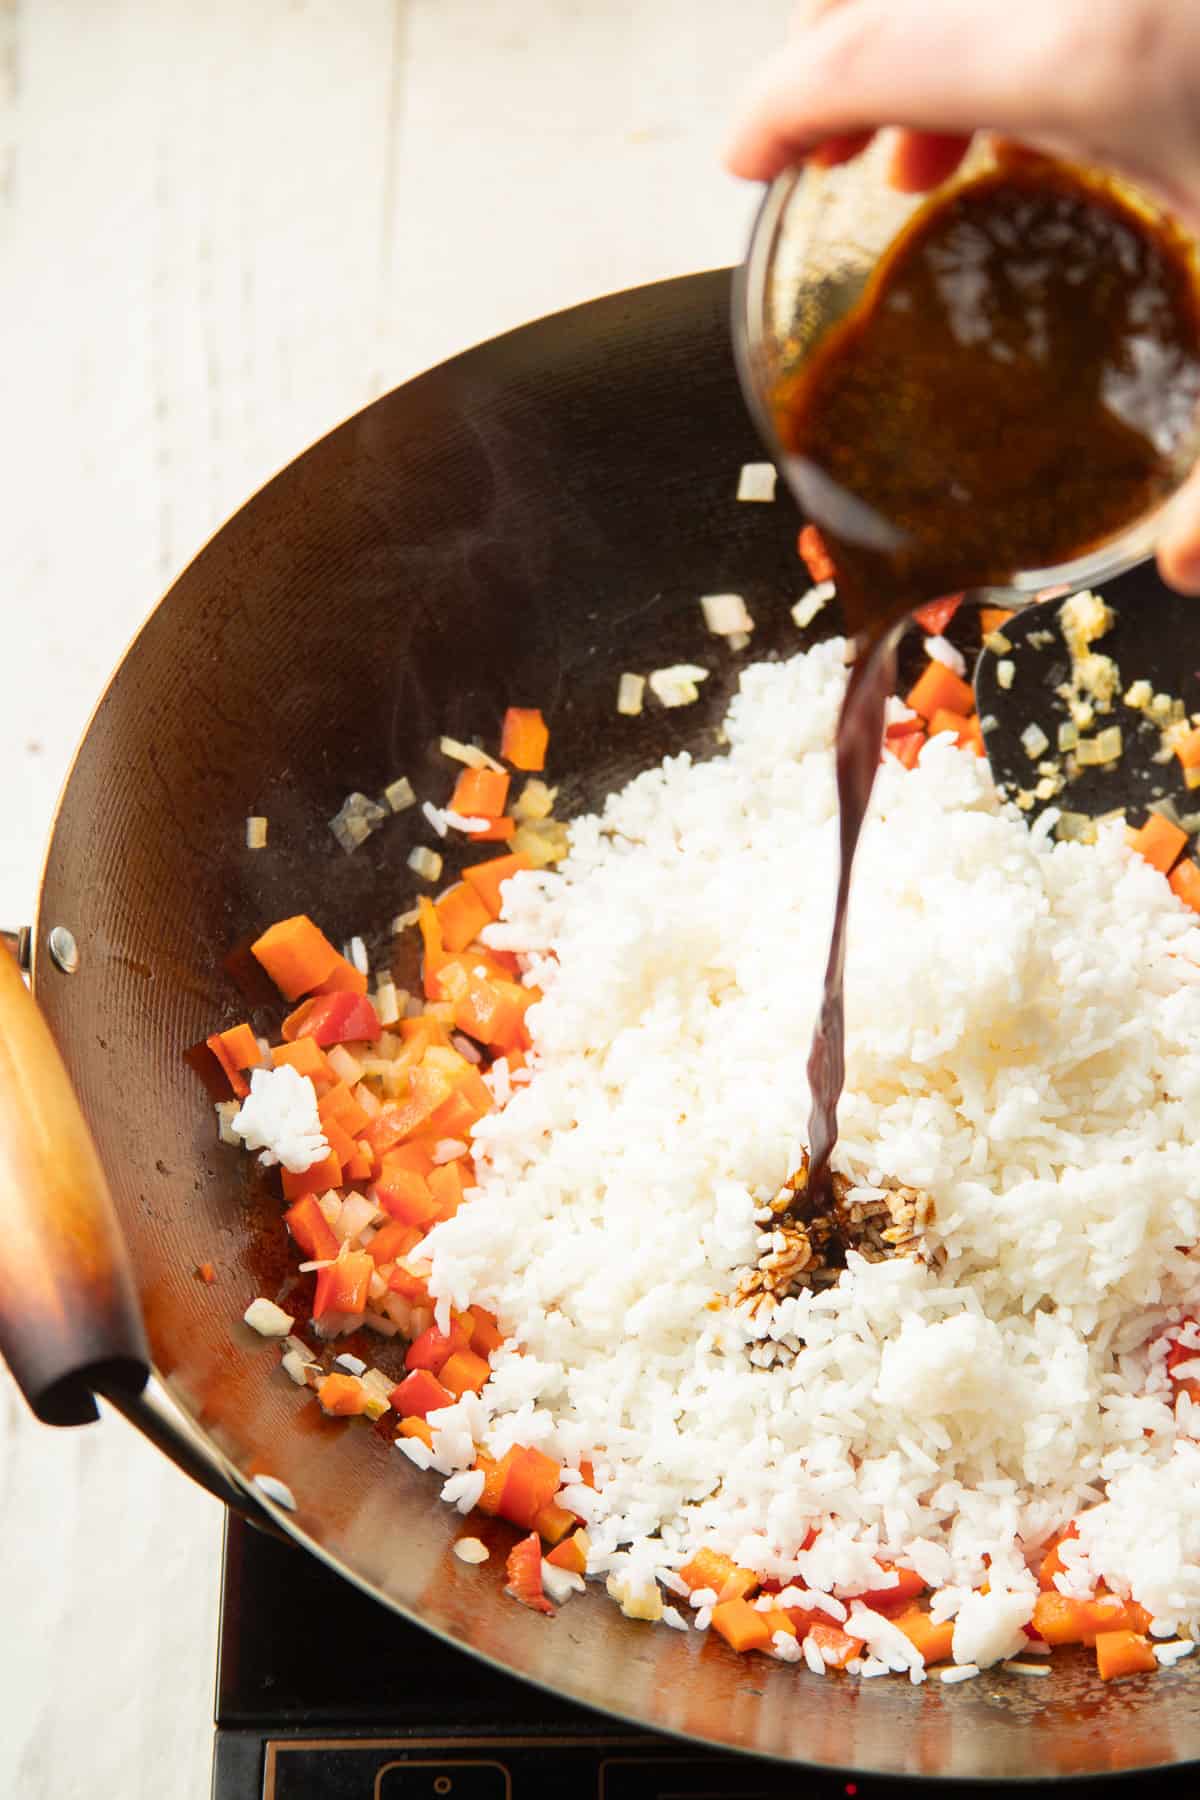 Hand pouring sauce into a skillet of veggies and rice.